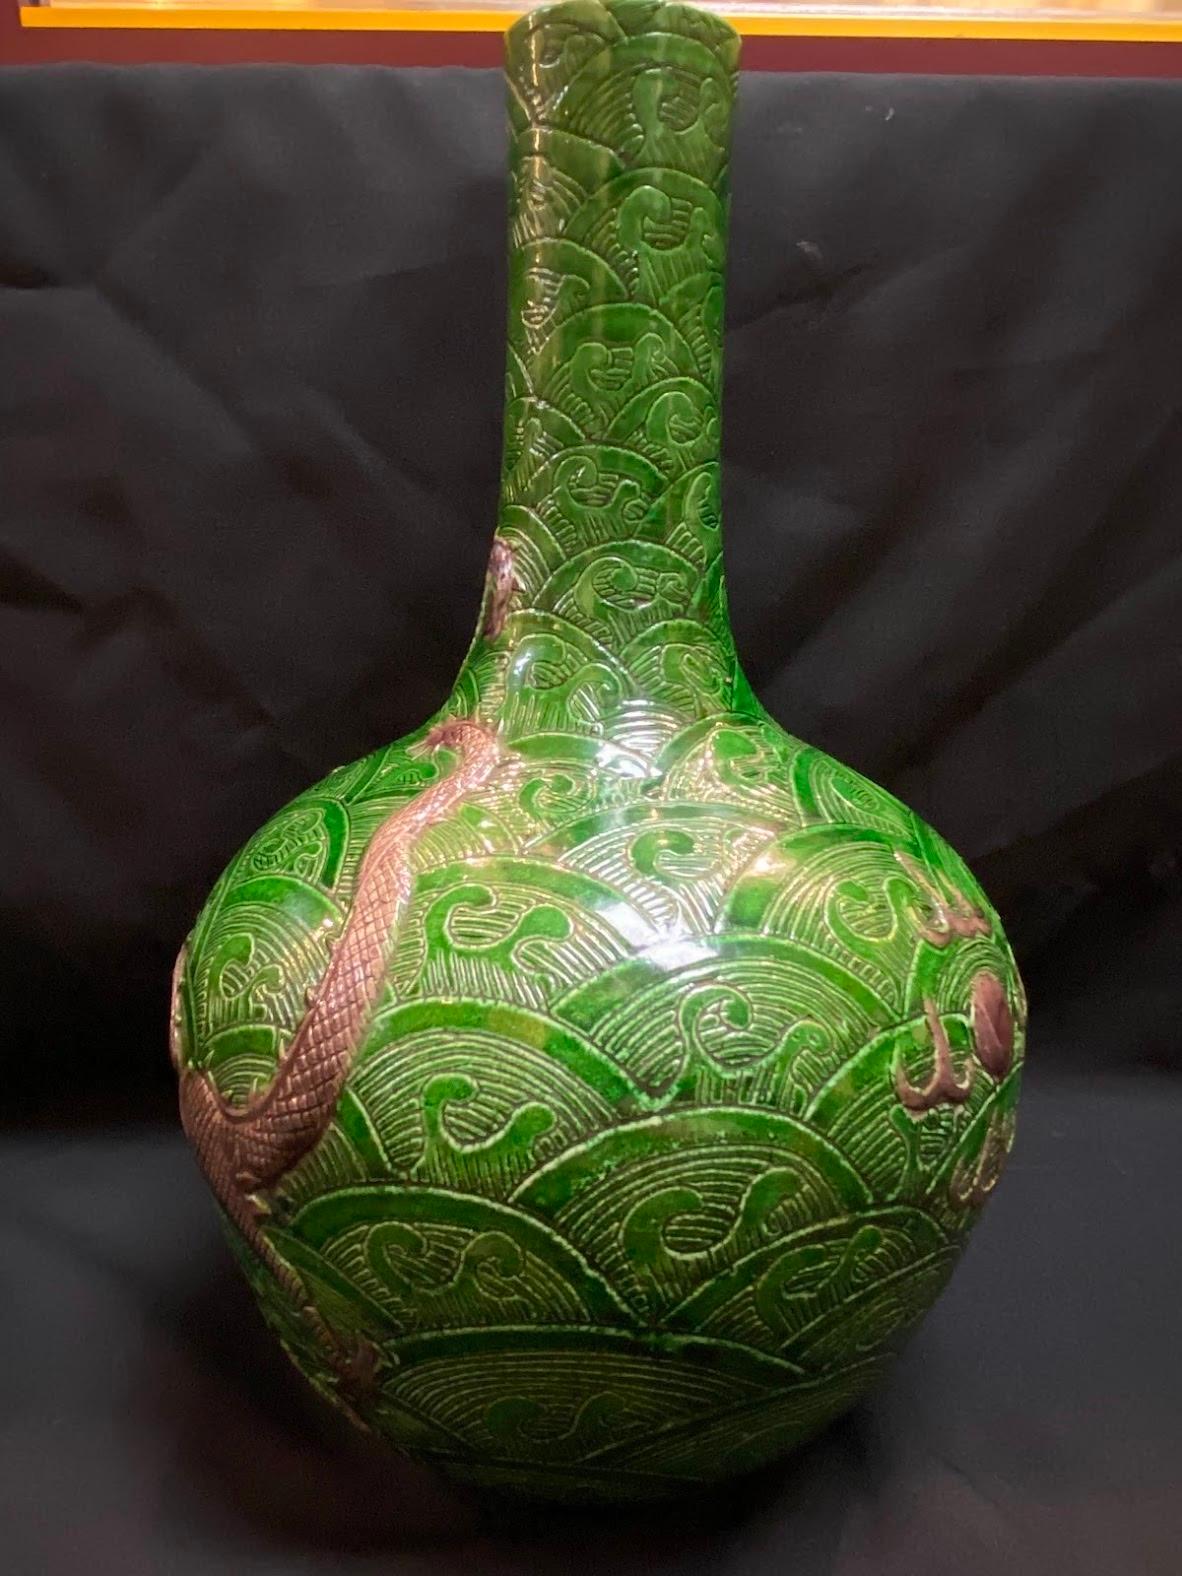 Qing, antique 20th century Sancai-glazed dragon pattern porcelain vase /
Condition: Shows normal sign of wear and use, No damage or crack. 
Material: Sancai-glazed porcelain
Approximate size:H:15 inch,W:7.5 inch,diameter of the rim:6 cm. Please